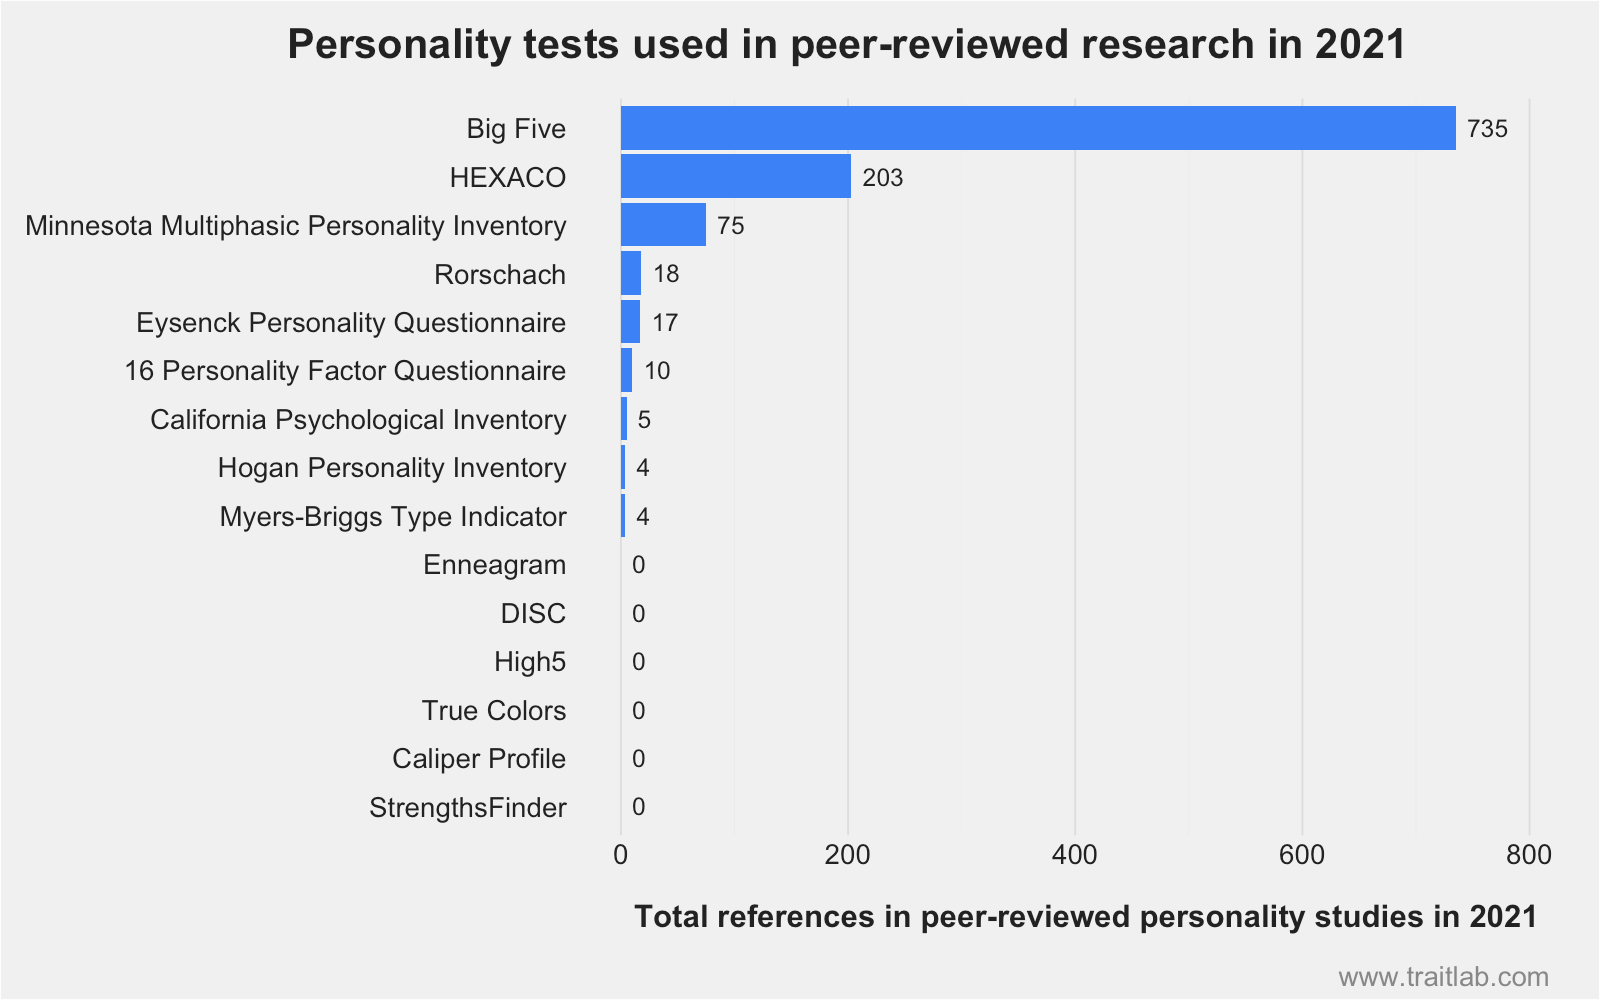 15 personality tests ranked by references in scientific publications in 2021